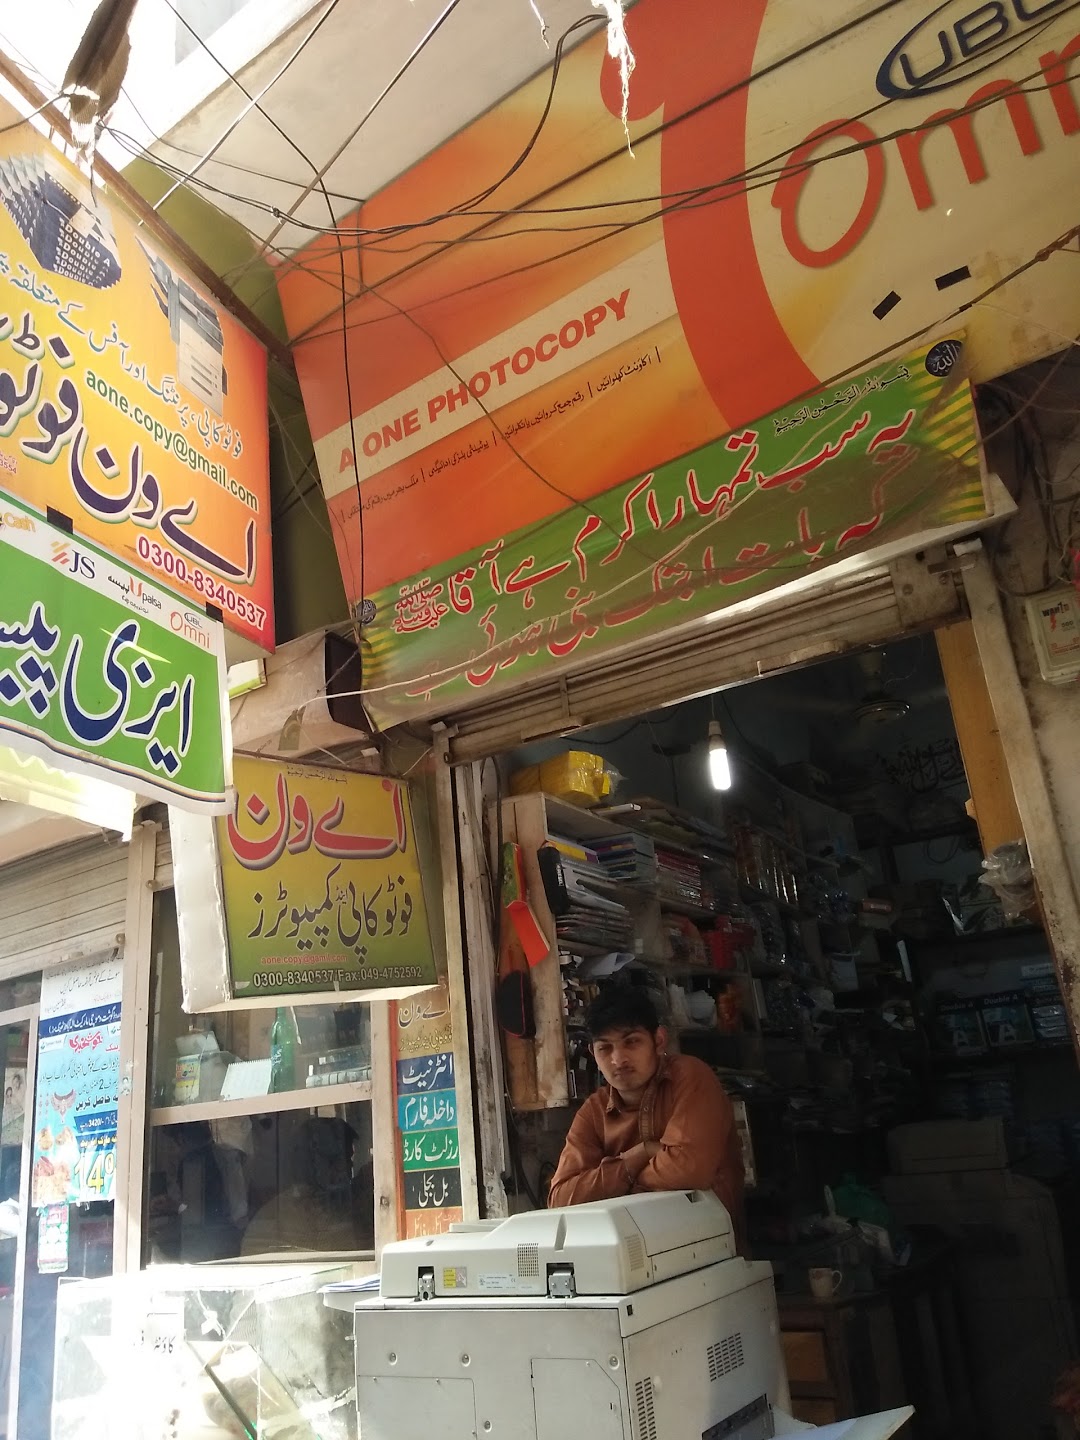 A ONE PHOTOCOPY and EASYPAISA SHOP